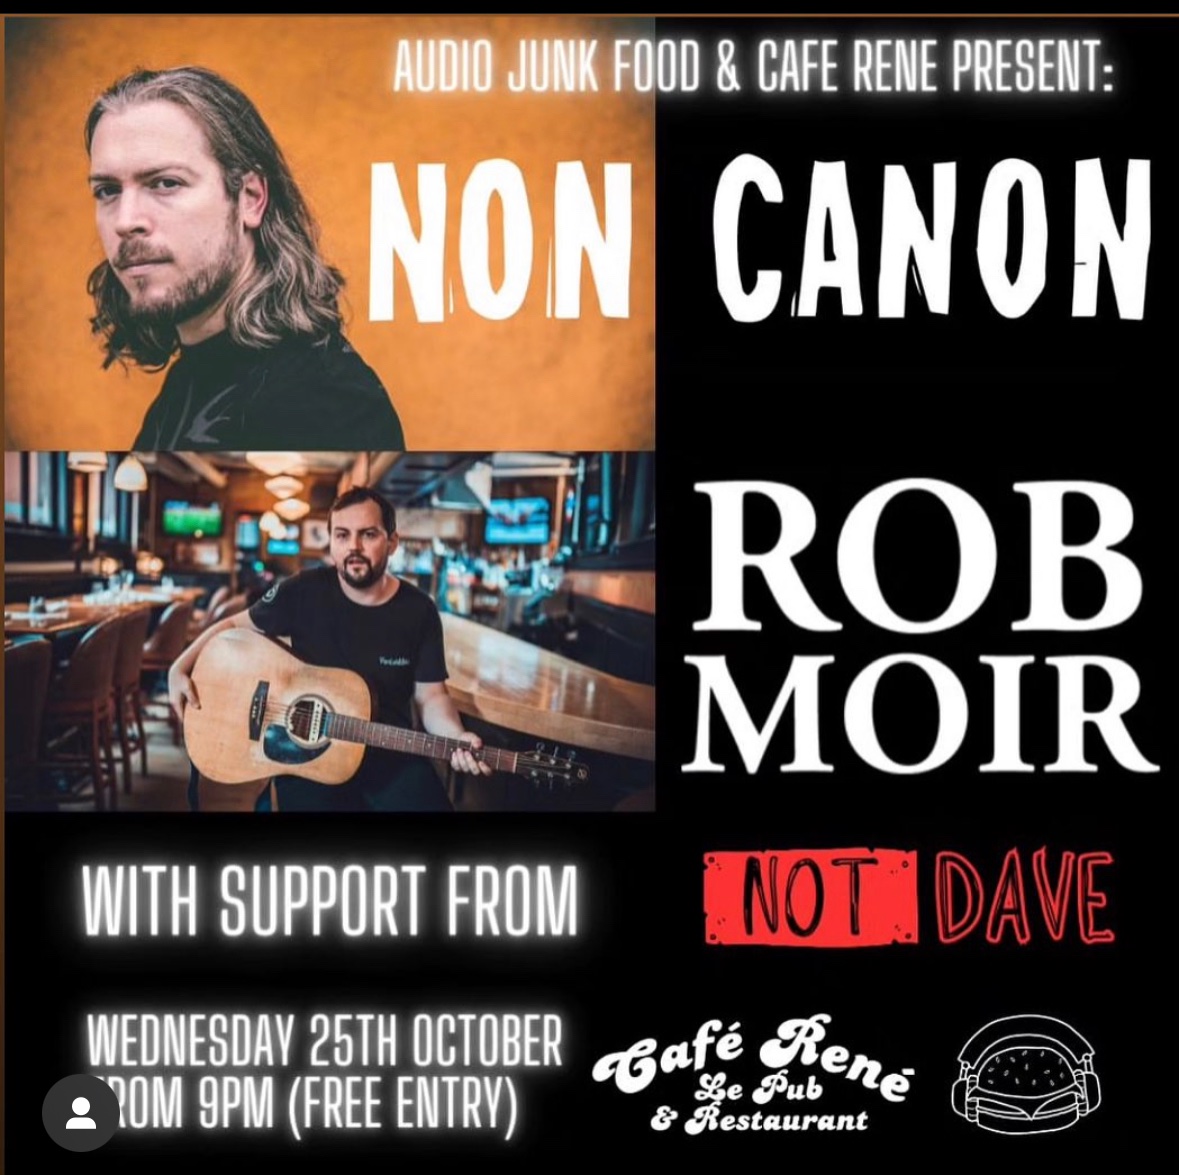 One week today! Me, @robmoirmusic & Not Dave at @CafeRene, Gloucester. I’m getting a scotch egg on the way. #GloucesterServicesForLife 🥚